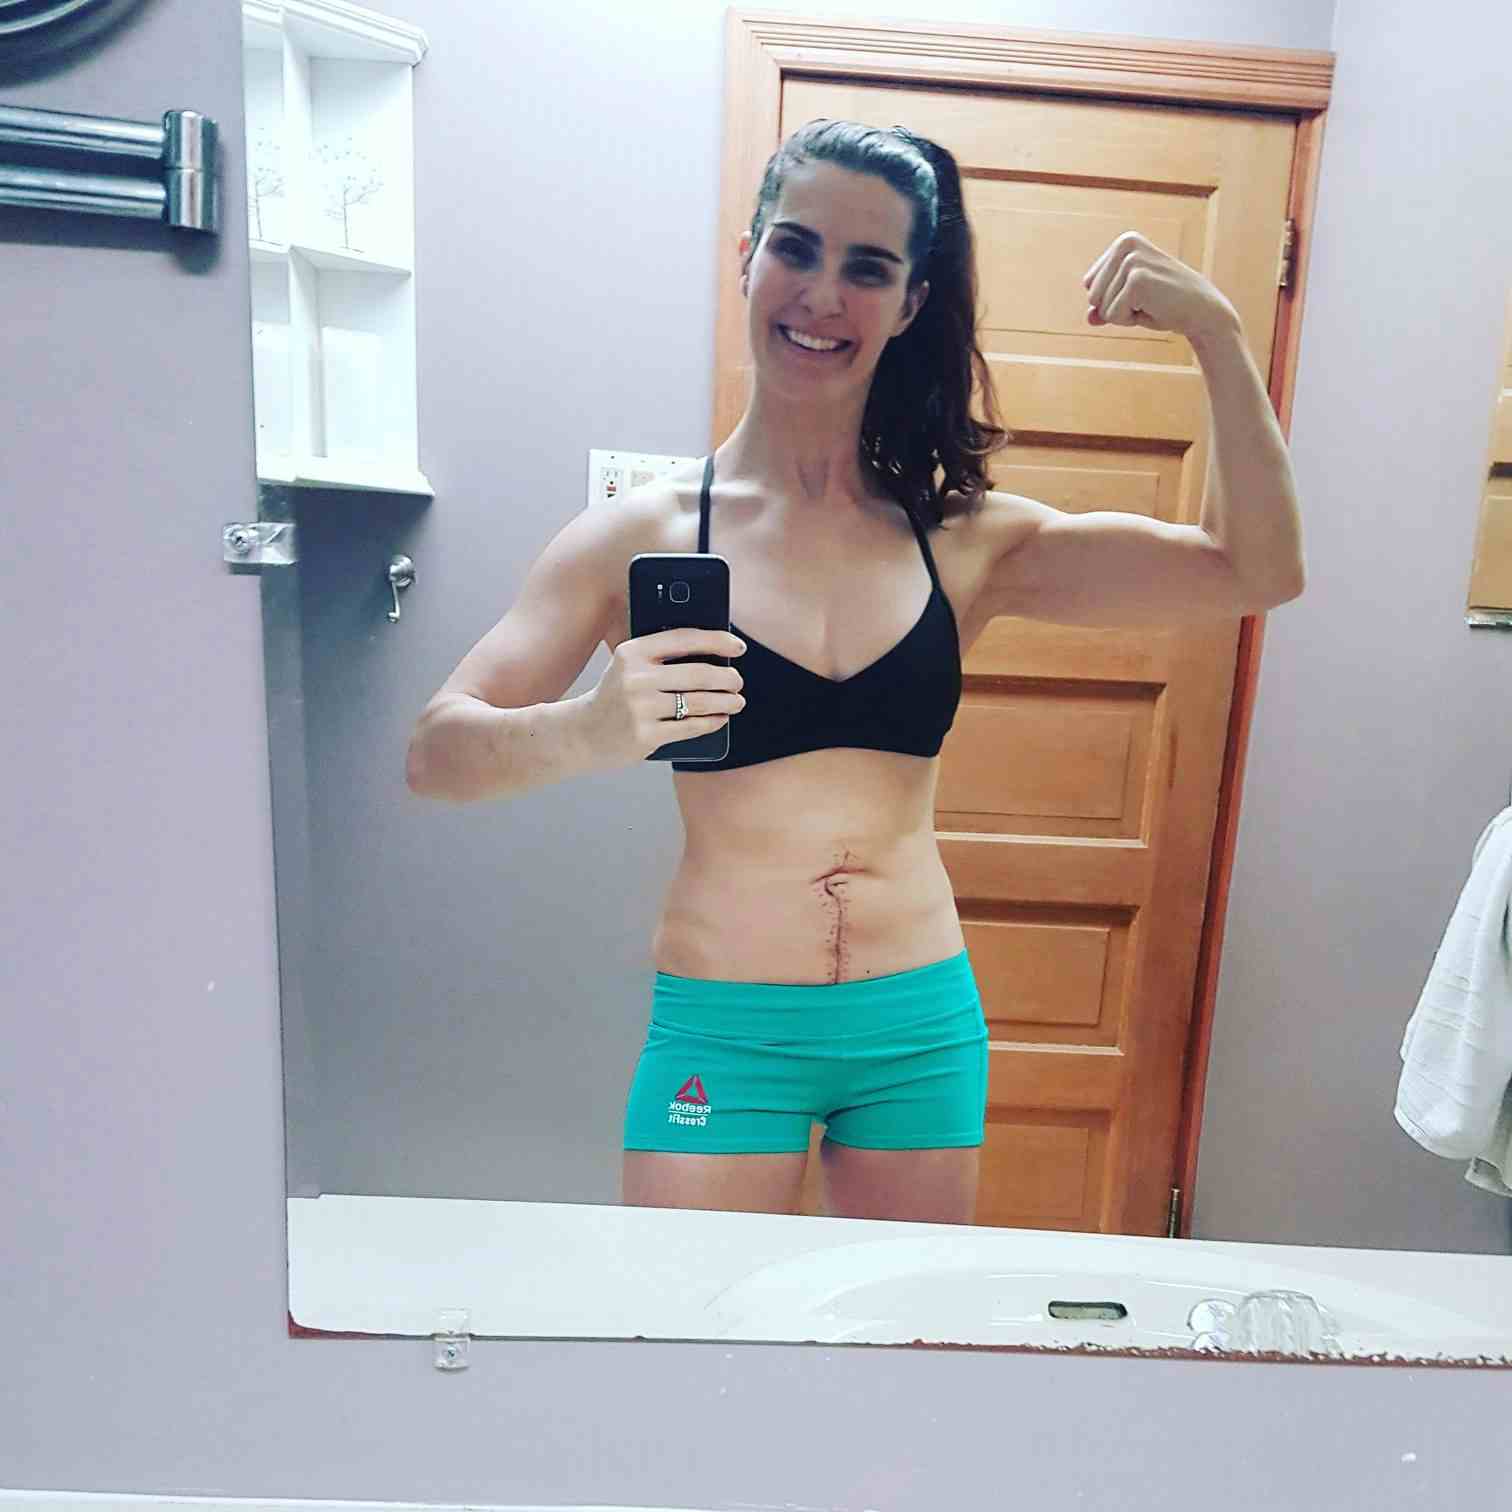 Jennifer Broxterman smiling and making a muscle, showing off her abdominal scar after cancer surgery